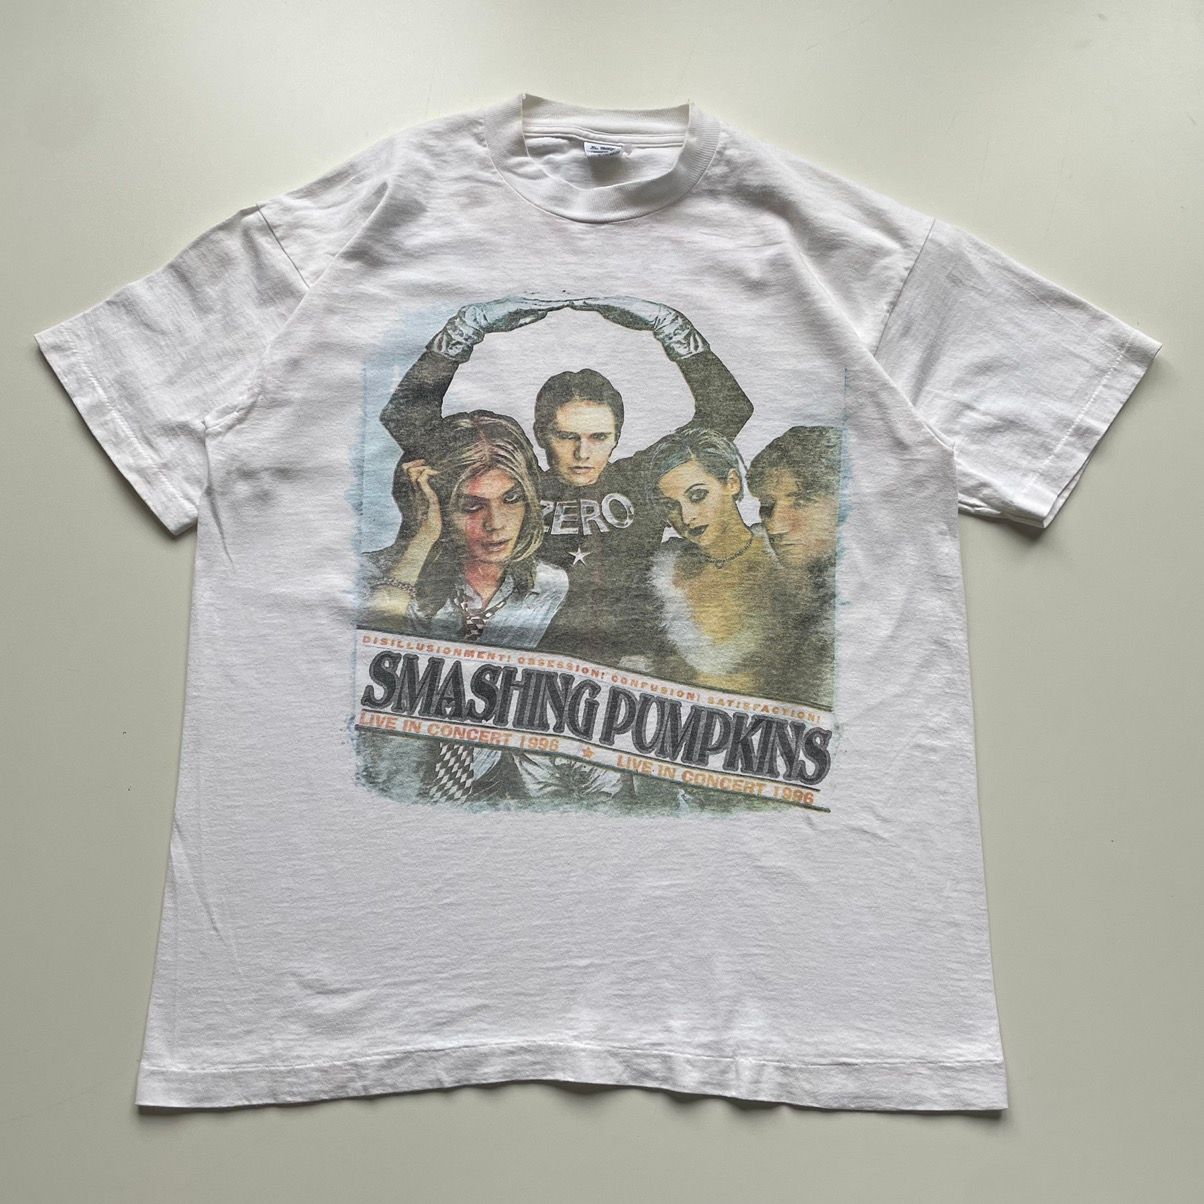 Pre-owned Band Tees Vintage 1996 Smashing Pumpkins With Garbage Tour T Shirt Xl In White